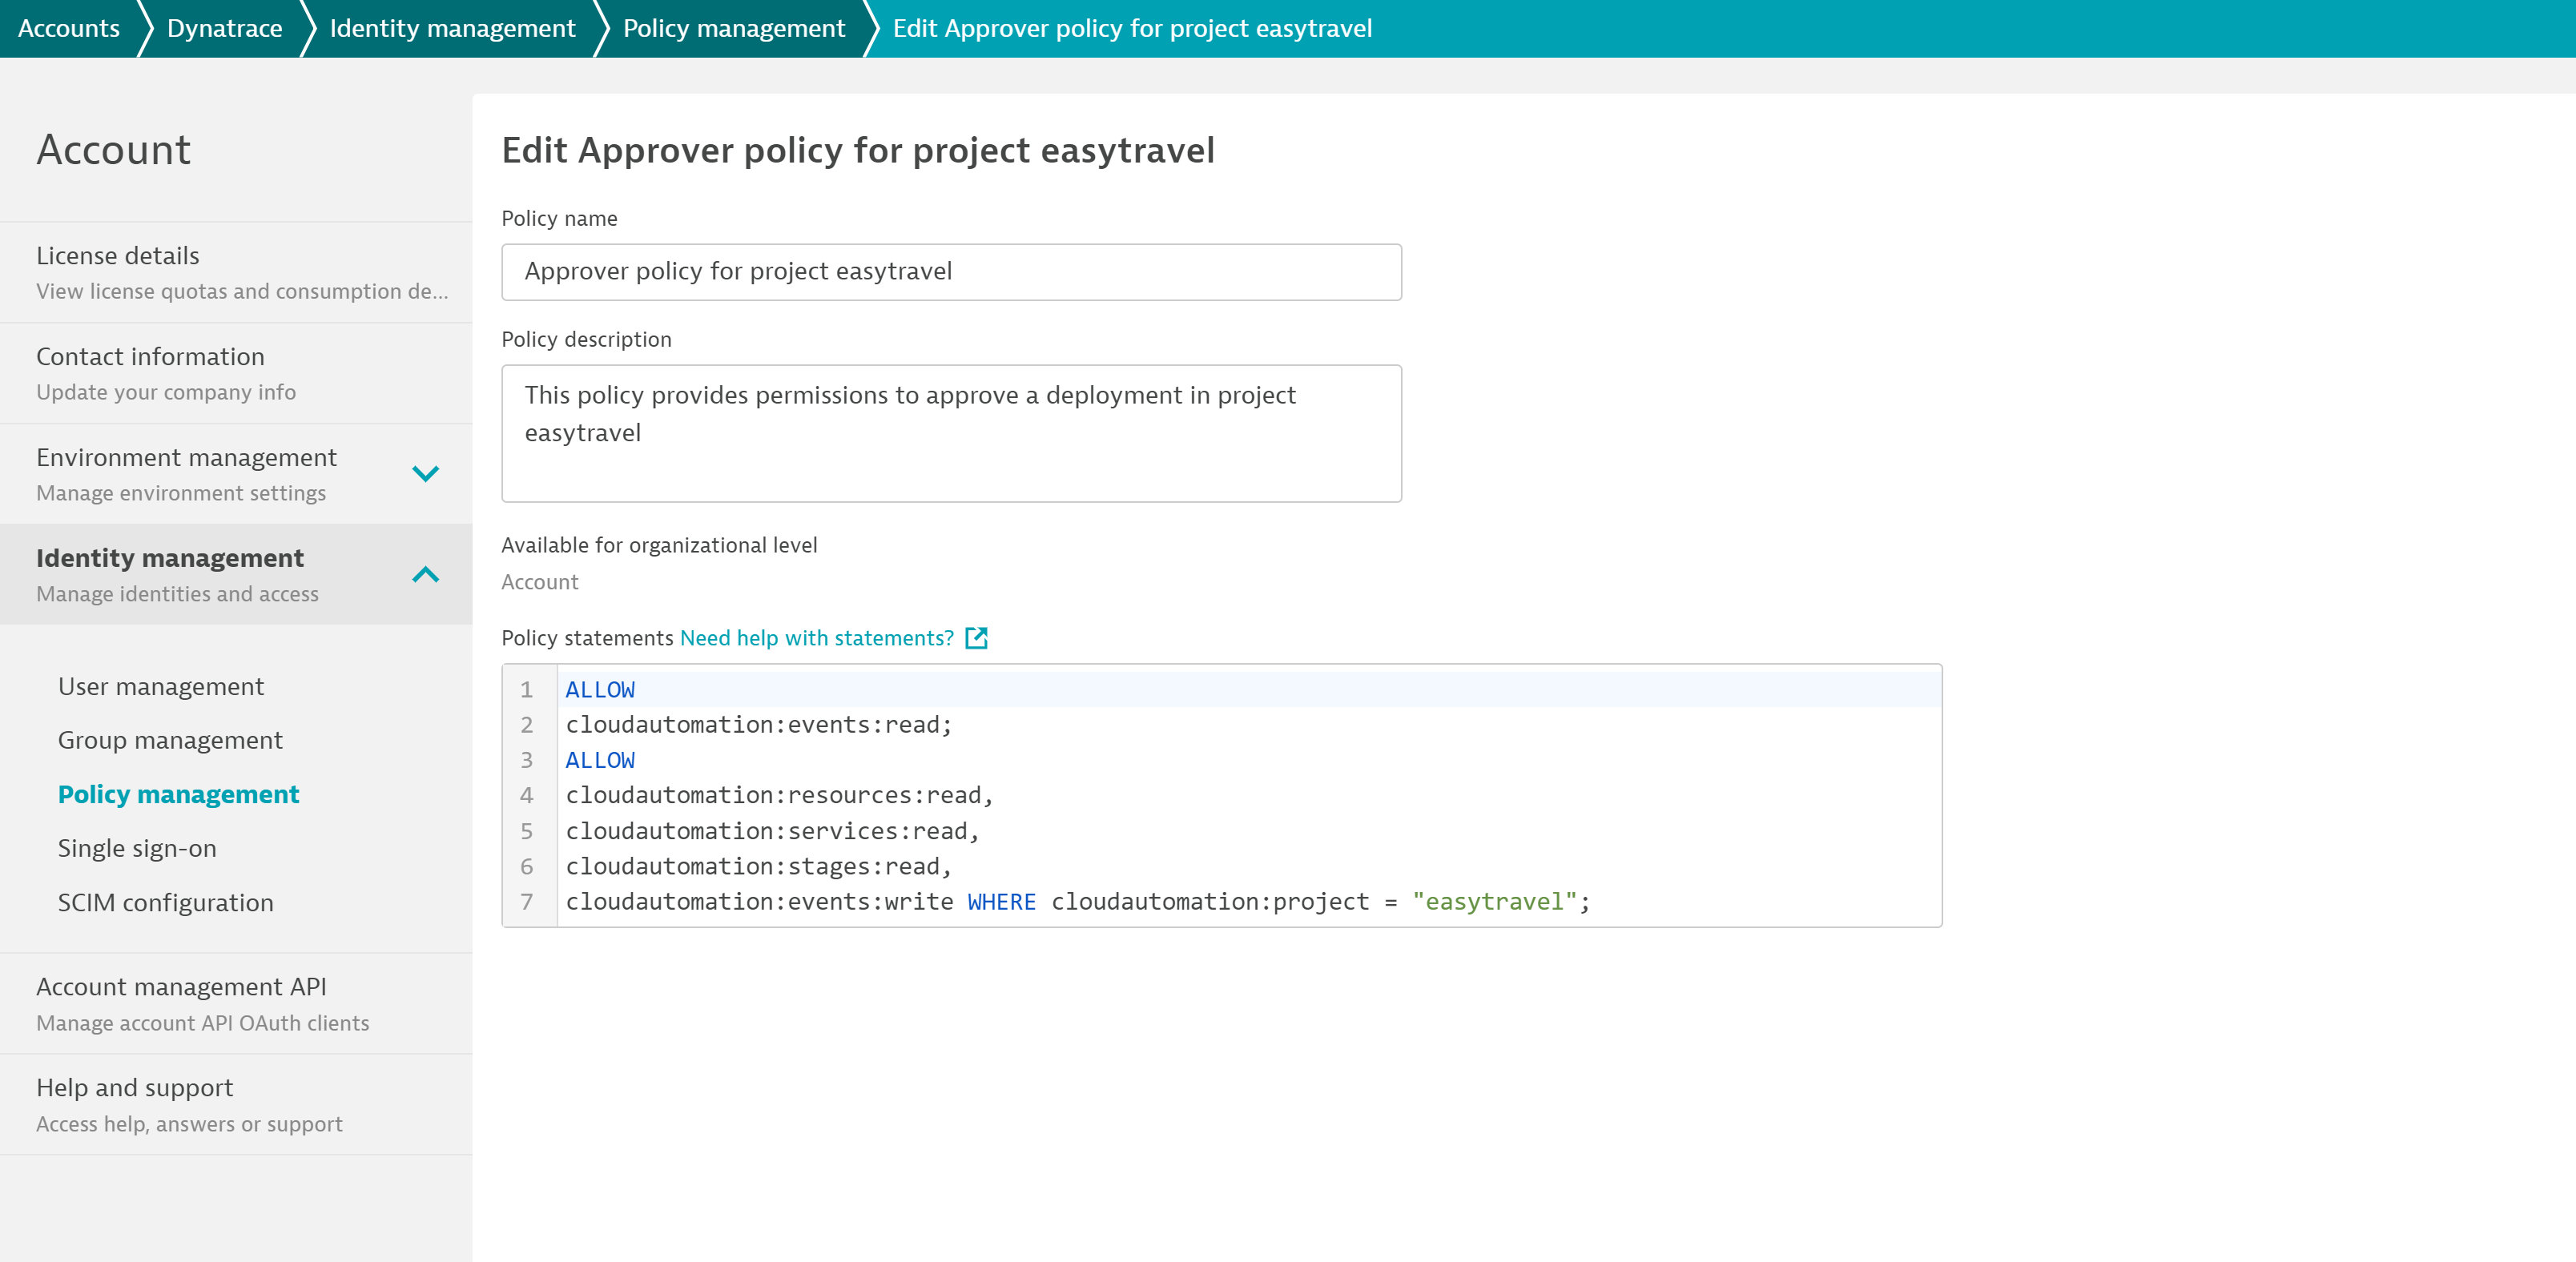 Edit Approver policy for Dynatrace Cloud Automation